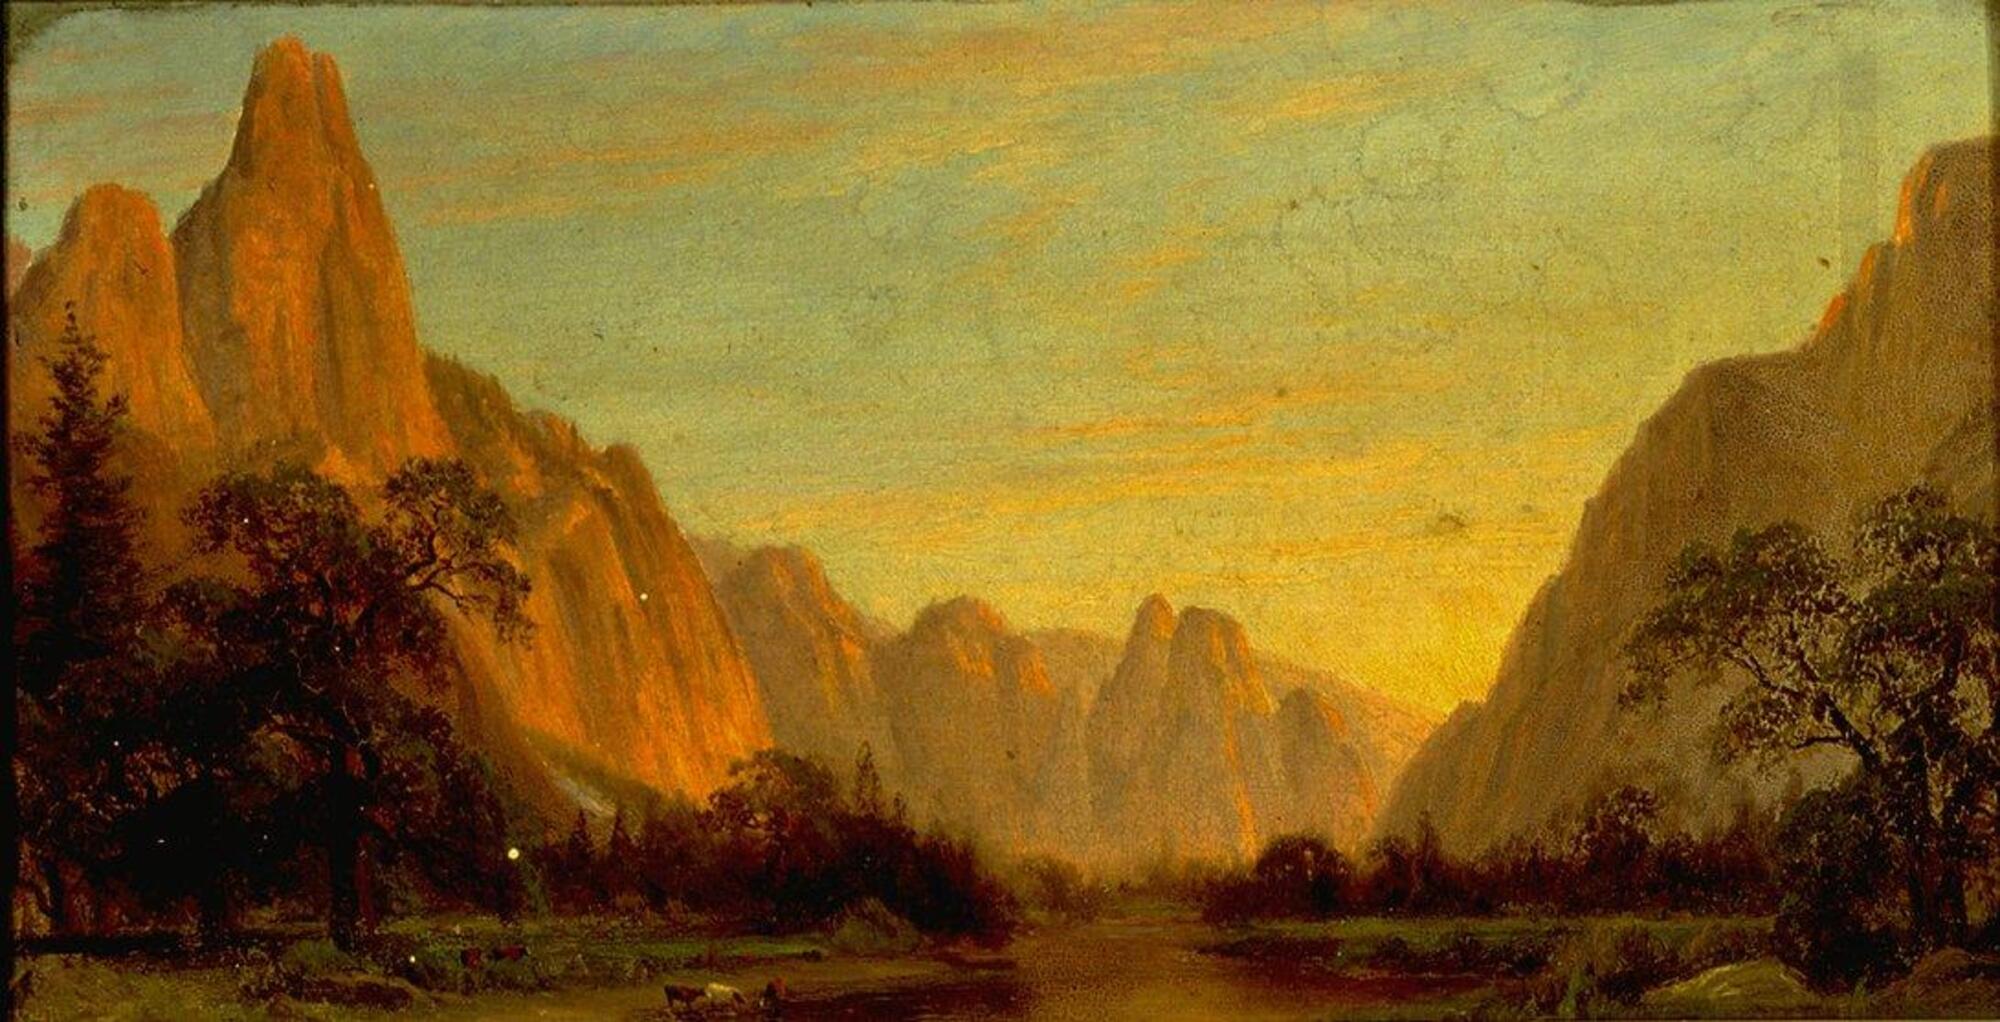 Landscape painting, despicts a valley surrounded by steeply inclined mountains. The foreground is occupied by trees, cows, and still water. Light emanates from lower-right end of the valley, illuminating the left-most rock face. (Larson 2/5/18)